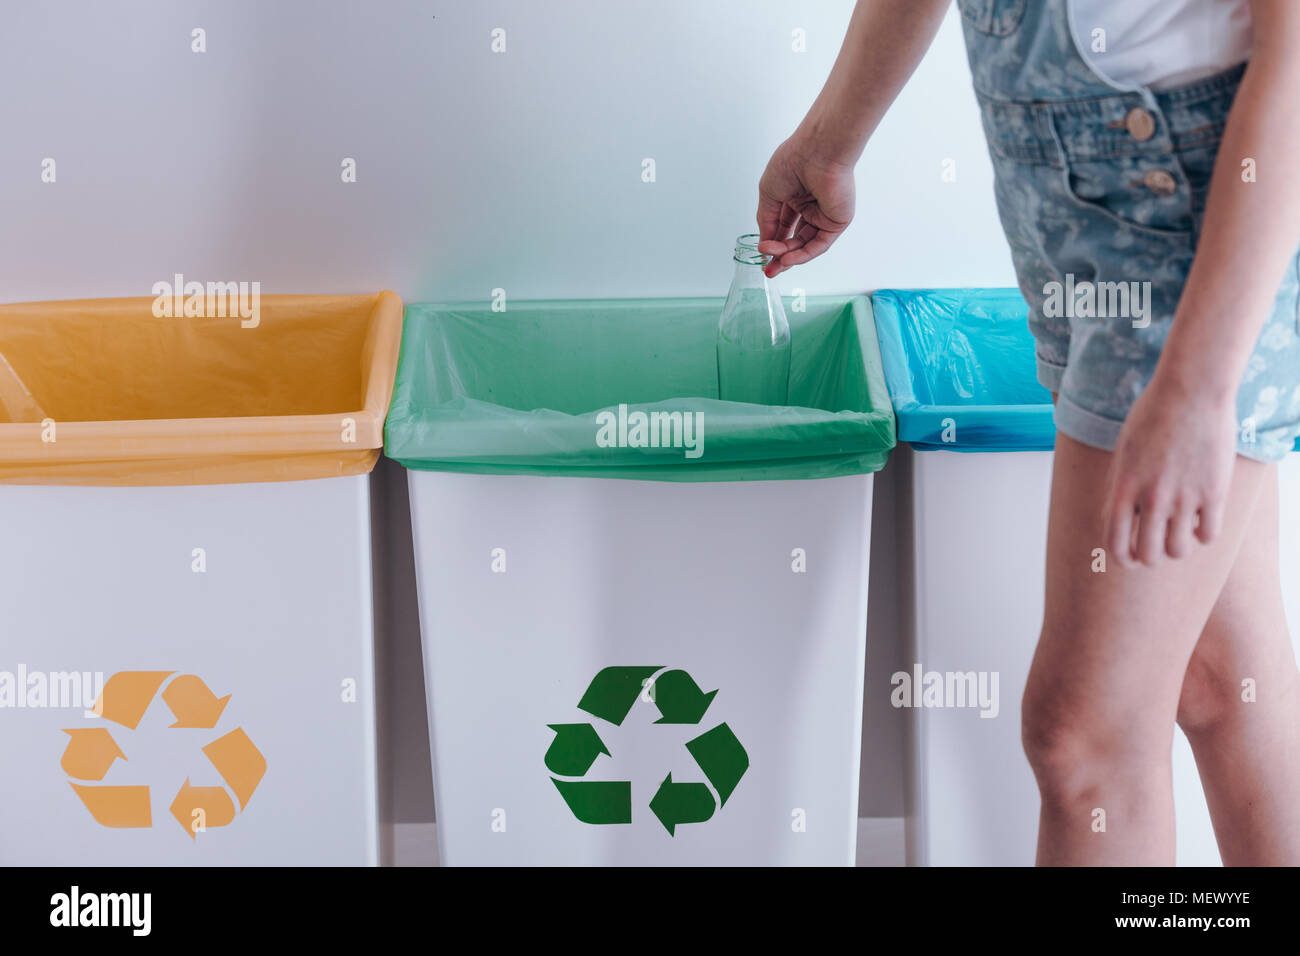 Child throwing a glass bottle into green container for recycling Stock Photo